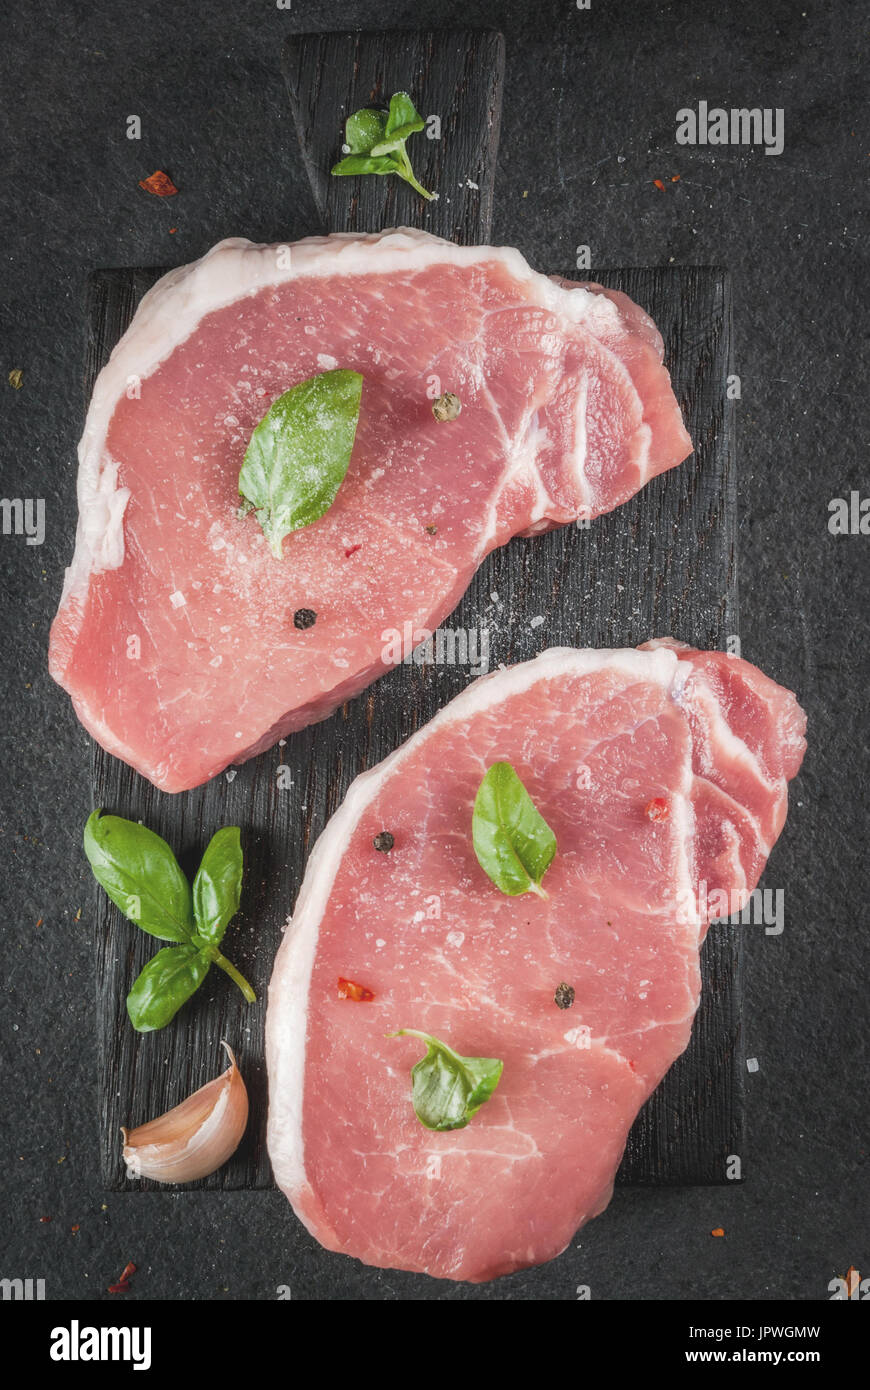 Raw organic meat. Pork steaks, fillets for grilling, baking or frying. On a wooden cutting board, with salt, pepper, basil, tomatoes, garlic. On a gra Stock Photo